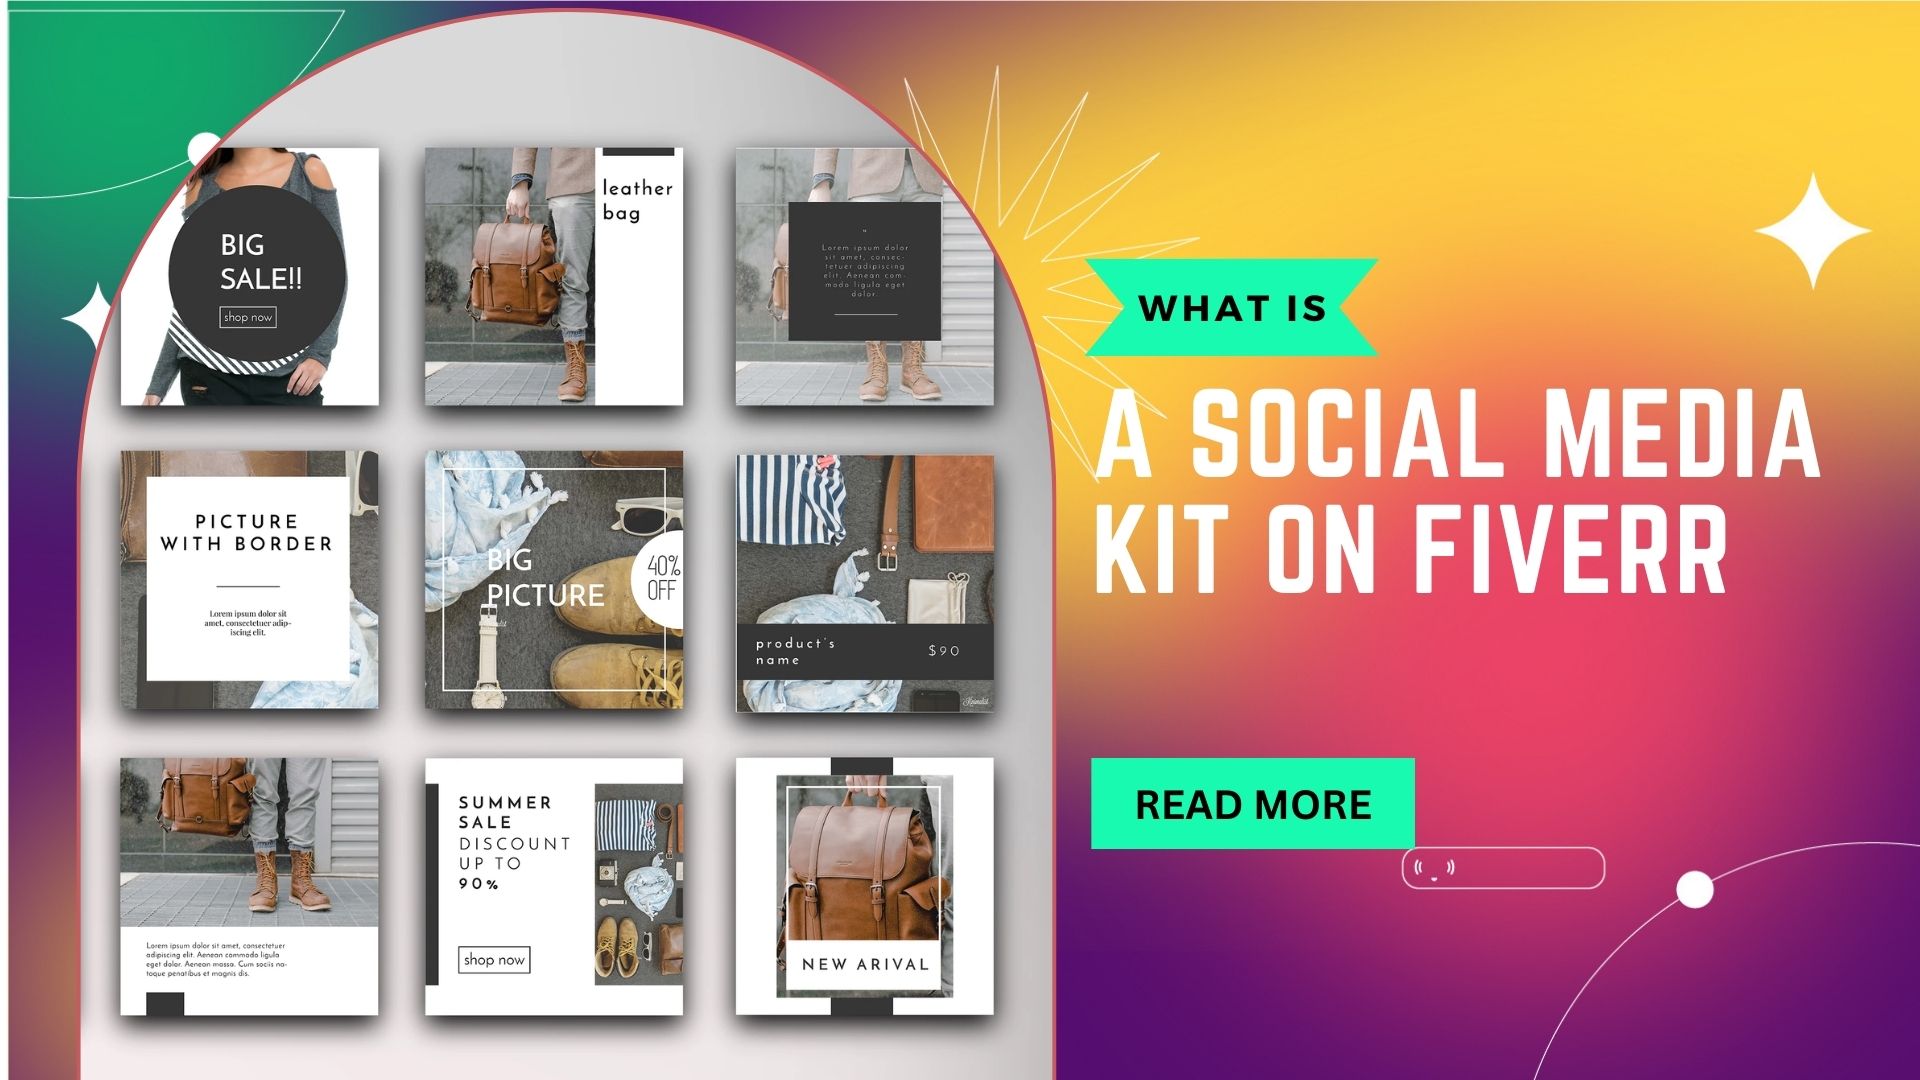 What Is a Social Media Kit on Fiverr?